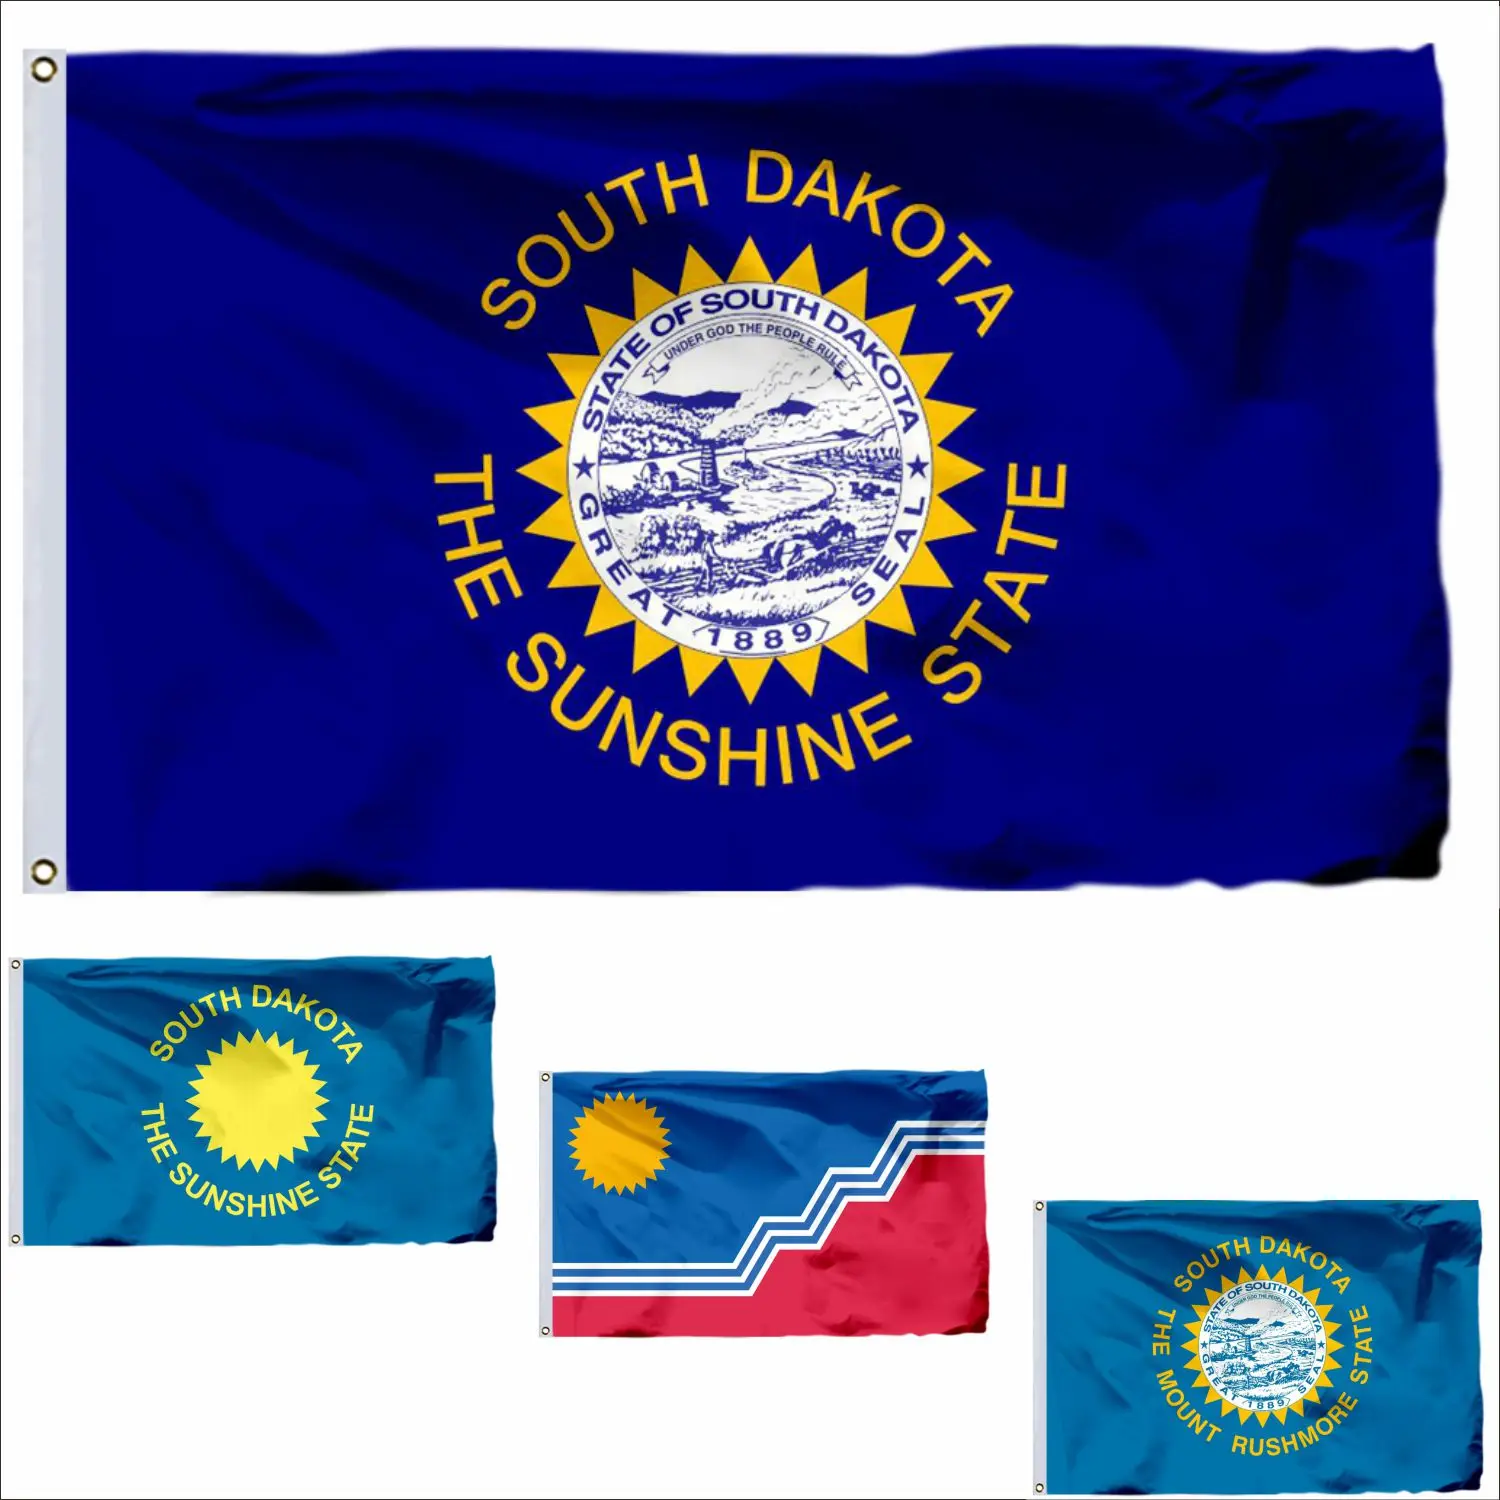 

USA Sioux Falls South Dakota Flag 90x150cm Midway 3x5ft US Guanica American United States Flags and Virgin Islands Banners